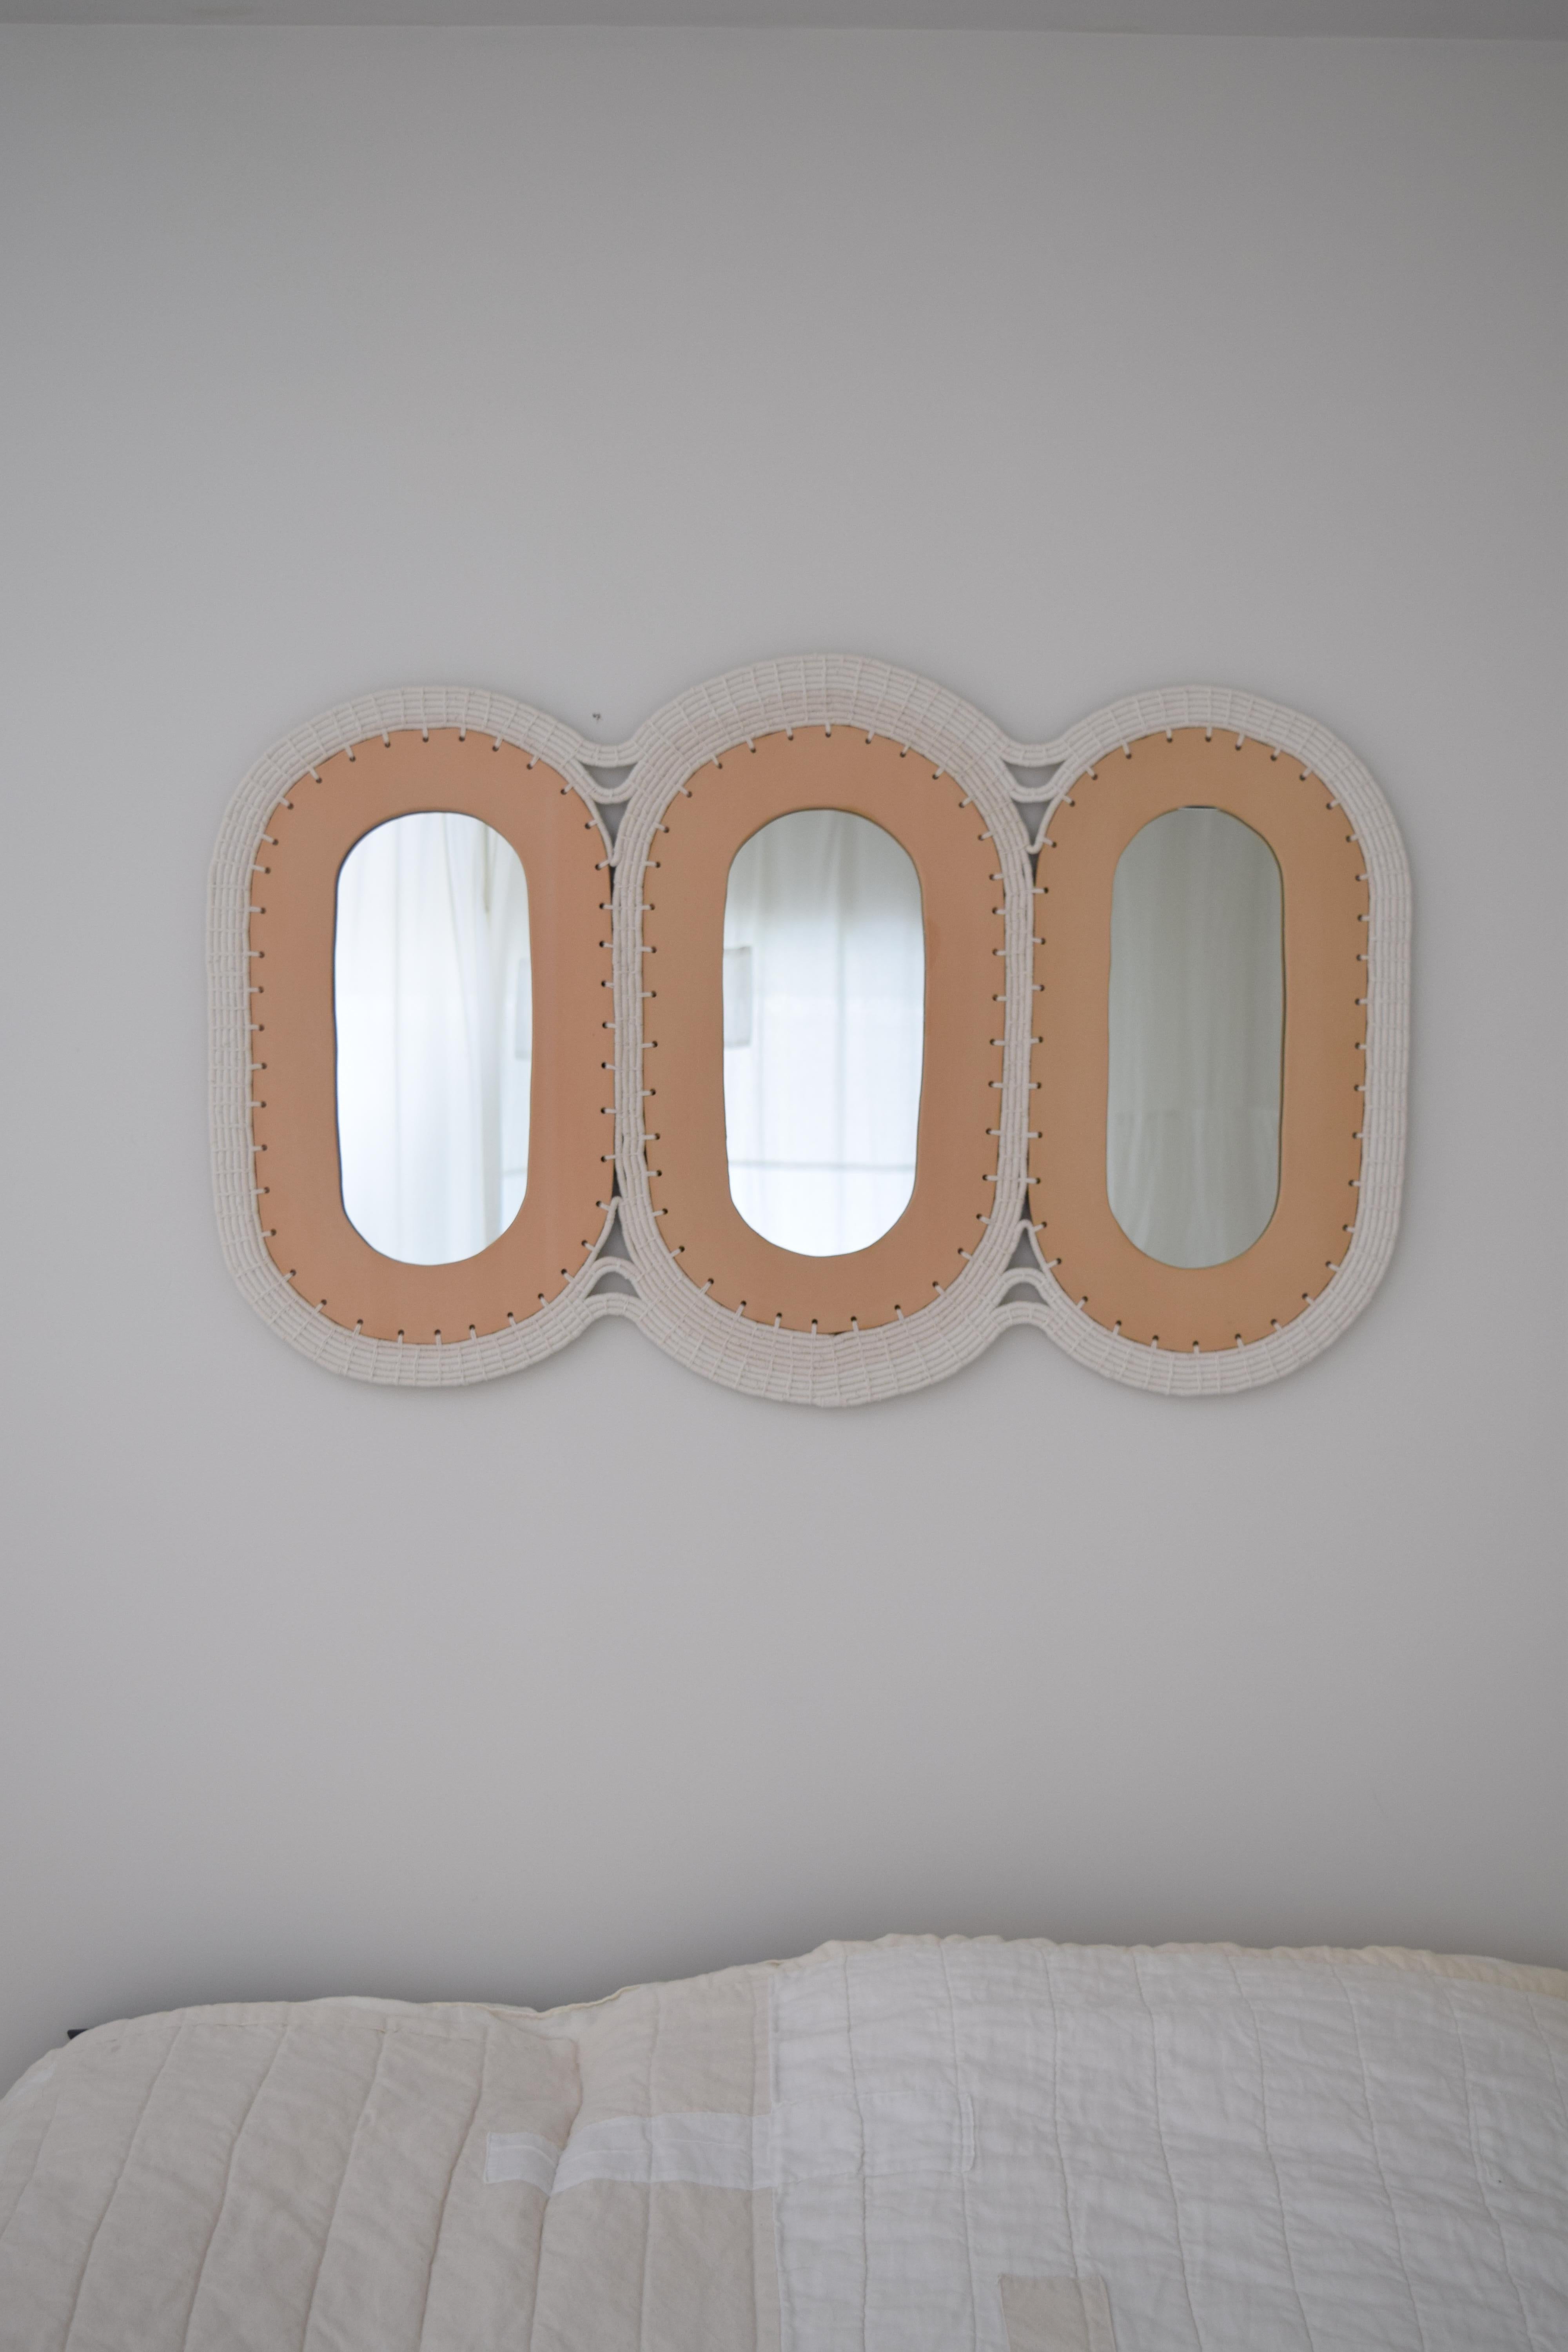 Hand-Crafted Handmade Mirror #801, Ceramic with Woven Cotton Surround, Custom Options For Sale